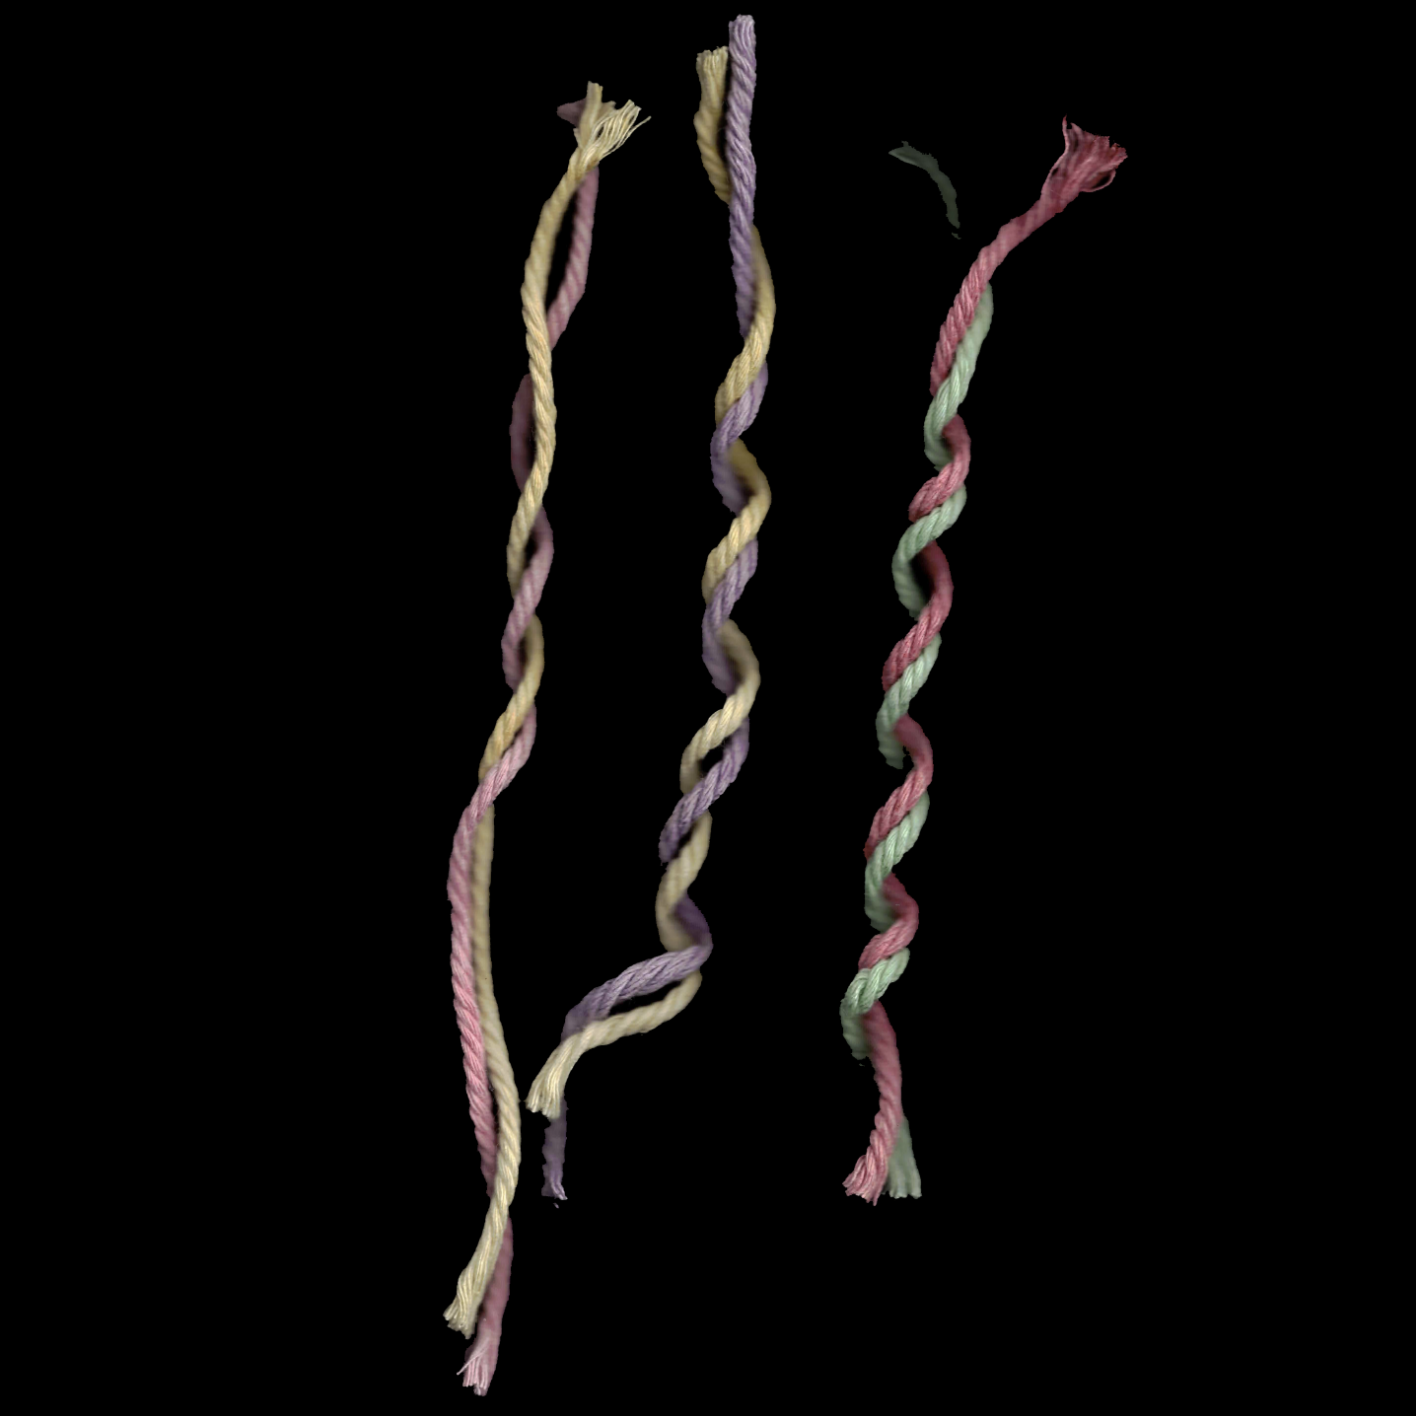 PICTURE: Different sections of unknotted threads coiled around each other
     representing the dipthong vowels /ai/, /ɛi/ and /au/ .